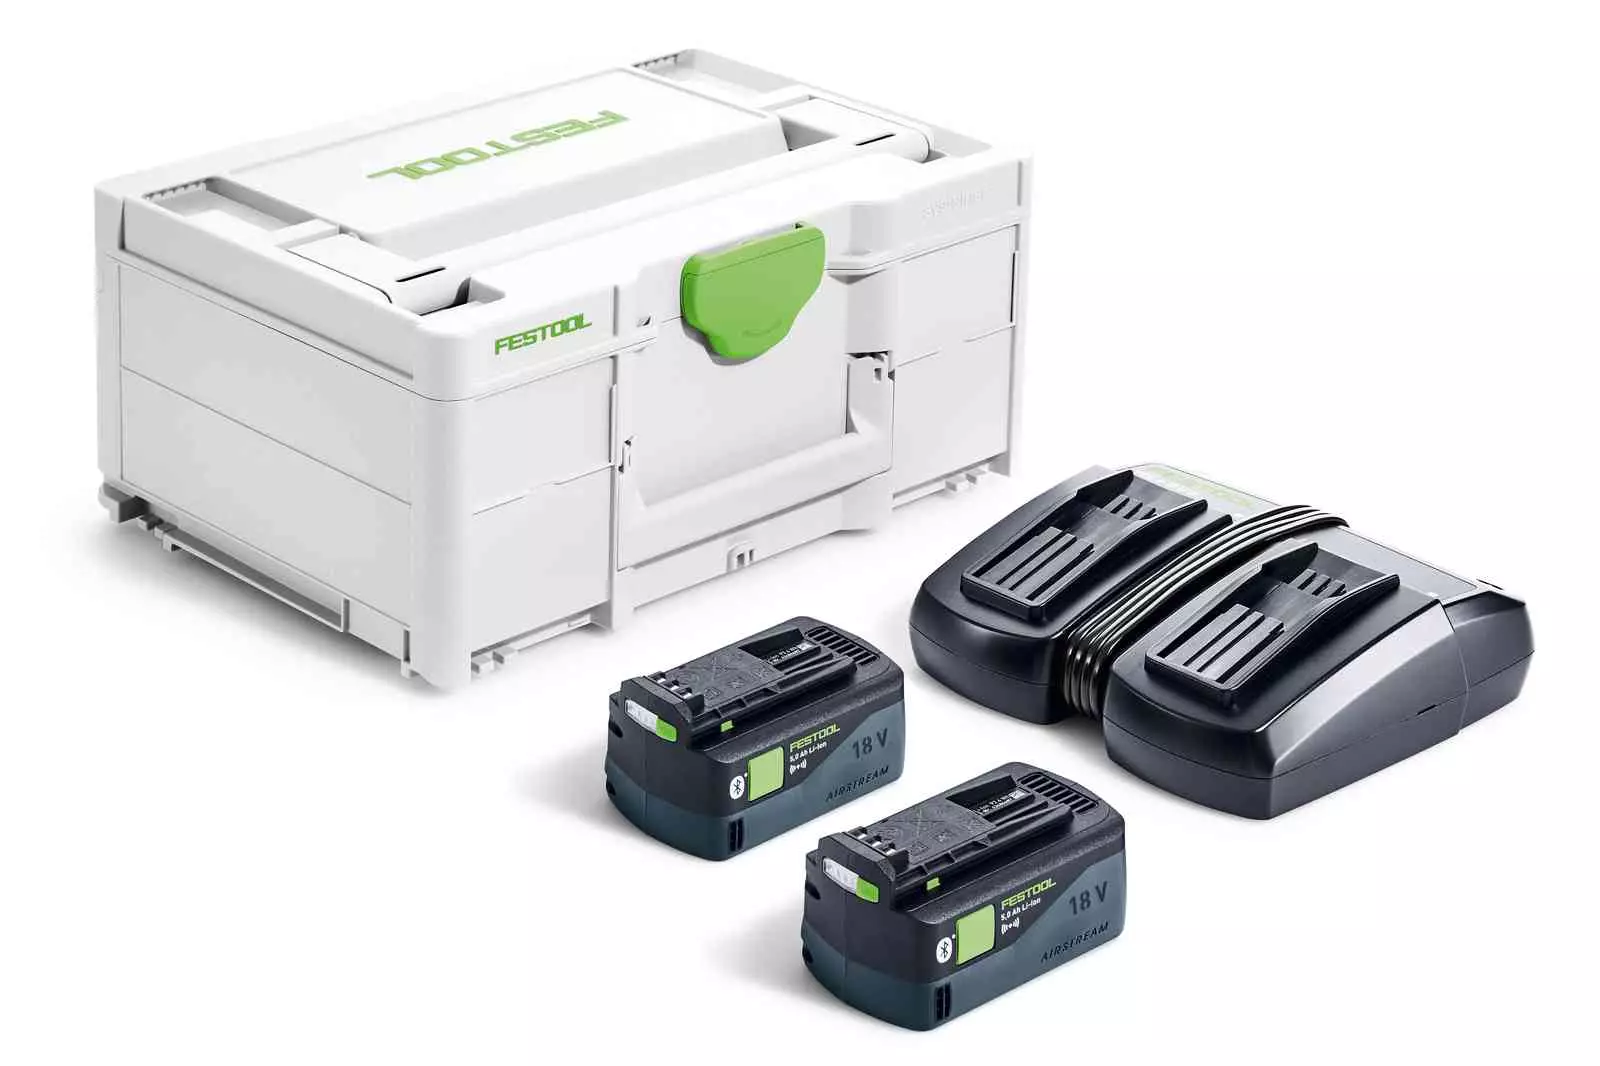 Set Énergie SYS 18V 2x5,0/TCL 6 DUO - FESTOOL - chargeur double - Systainer - 577707